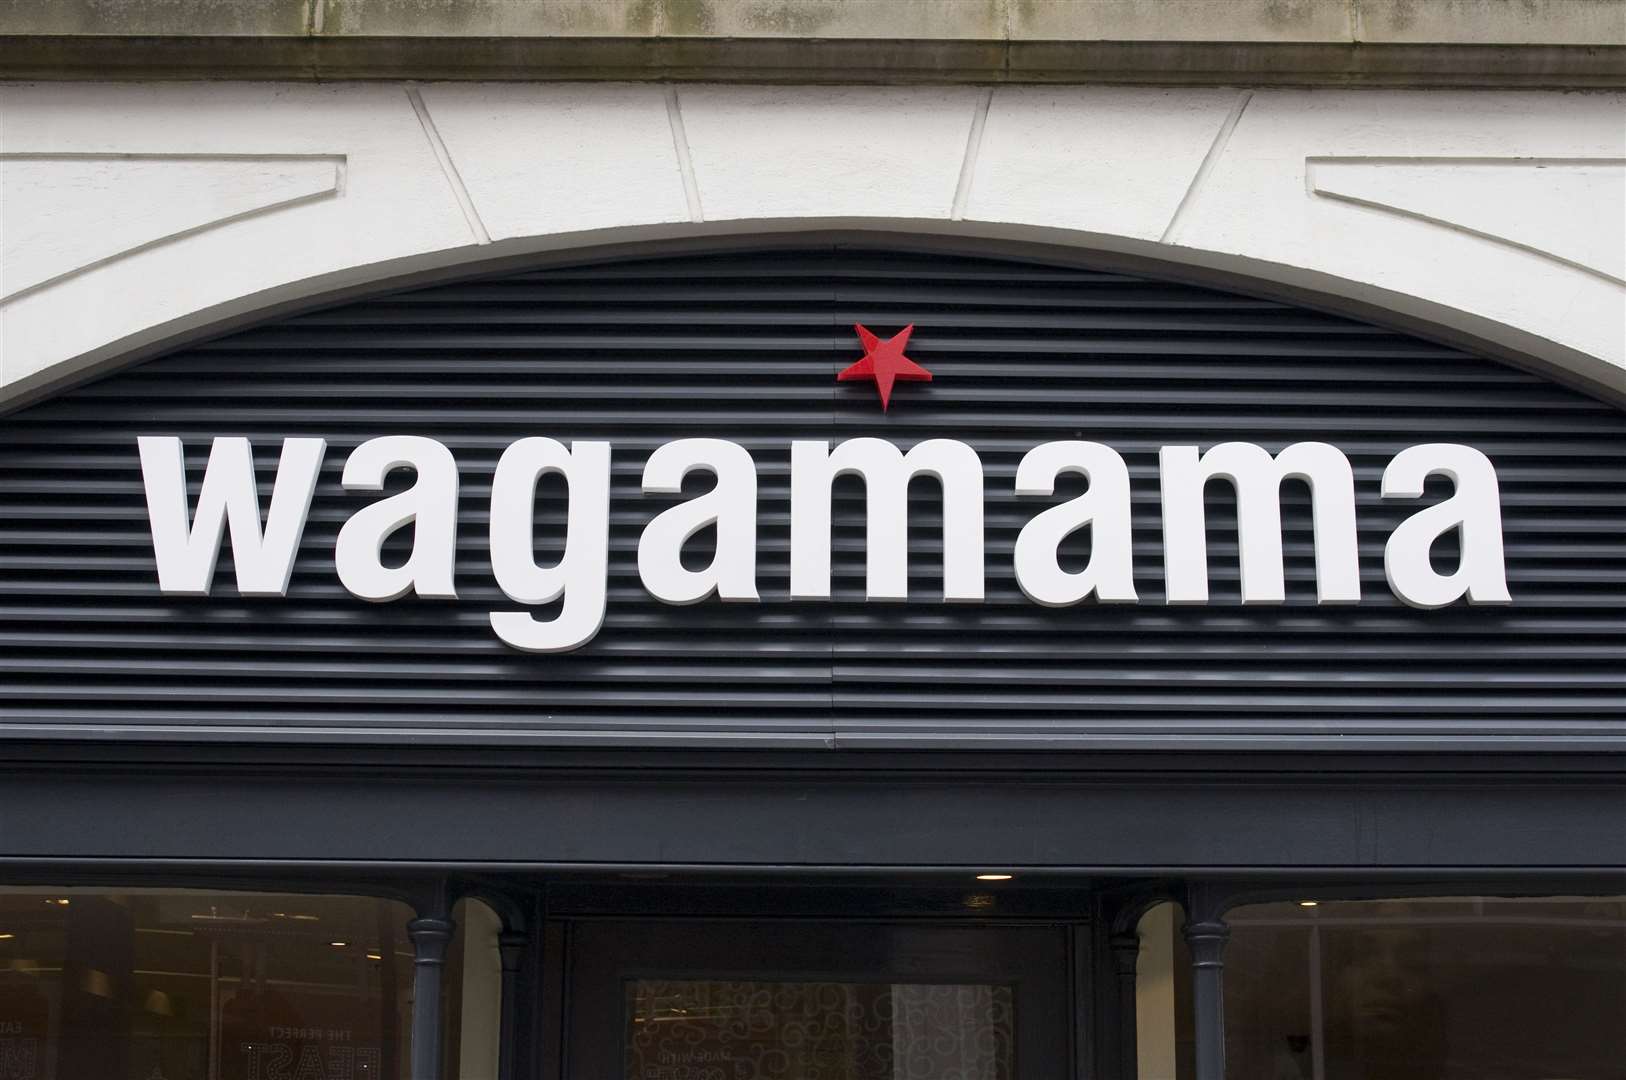 The Restaurant Group's most successful brand, Wagamama, has not announced any permanent closures